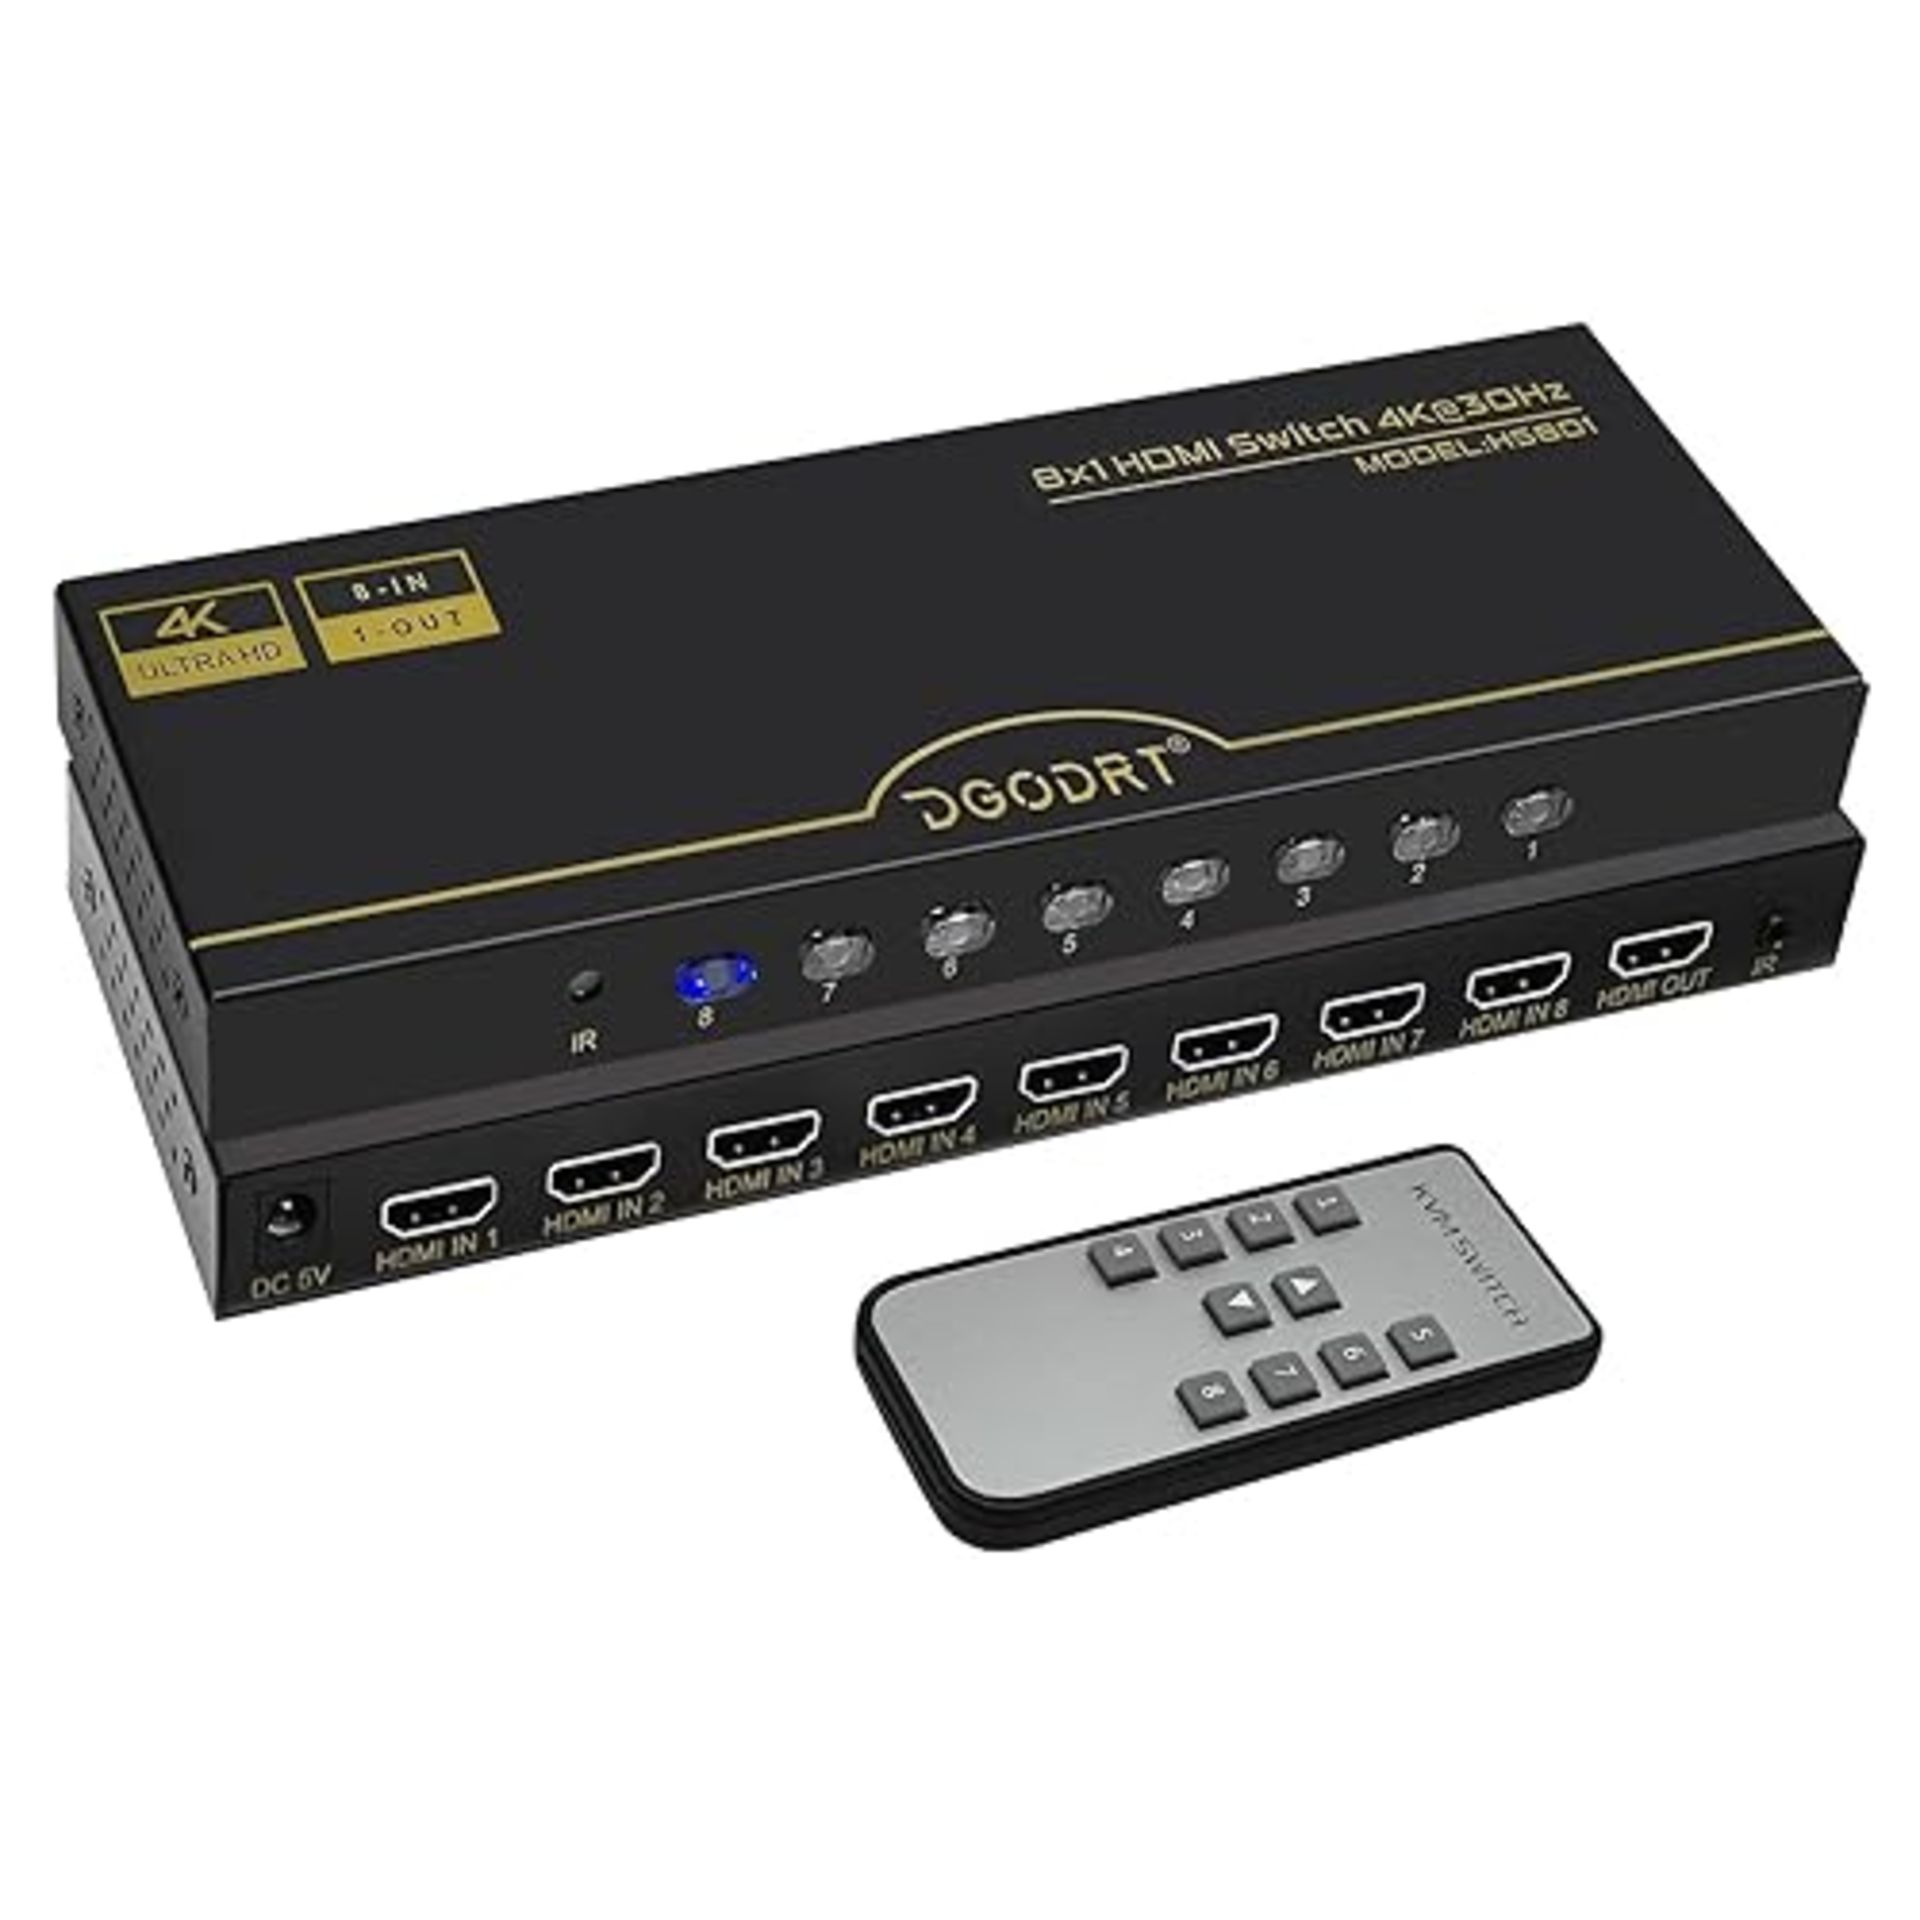 HDMI Switch 4K, HDMI Switcher Box 8 In 1 Out with Remote - Supports 4K@30Hz 3D HDR UHD 1080P for PS